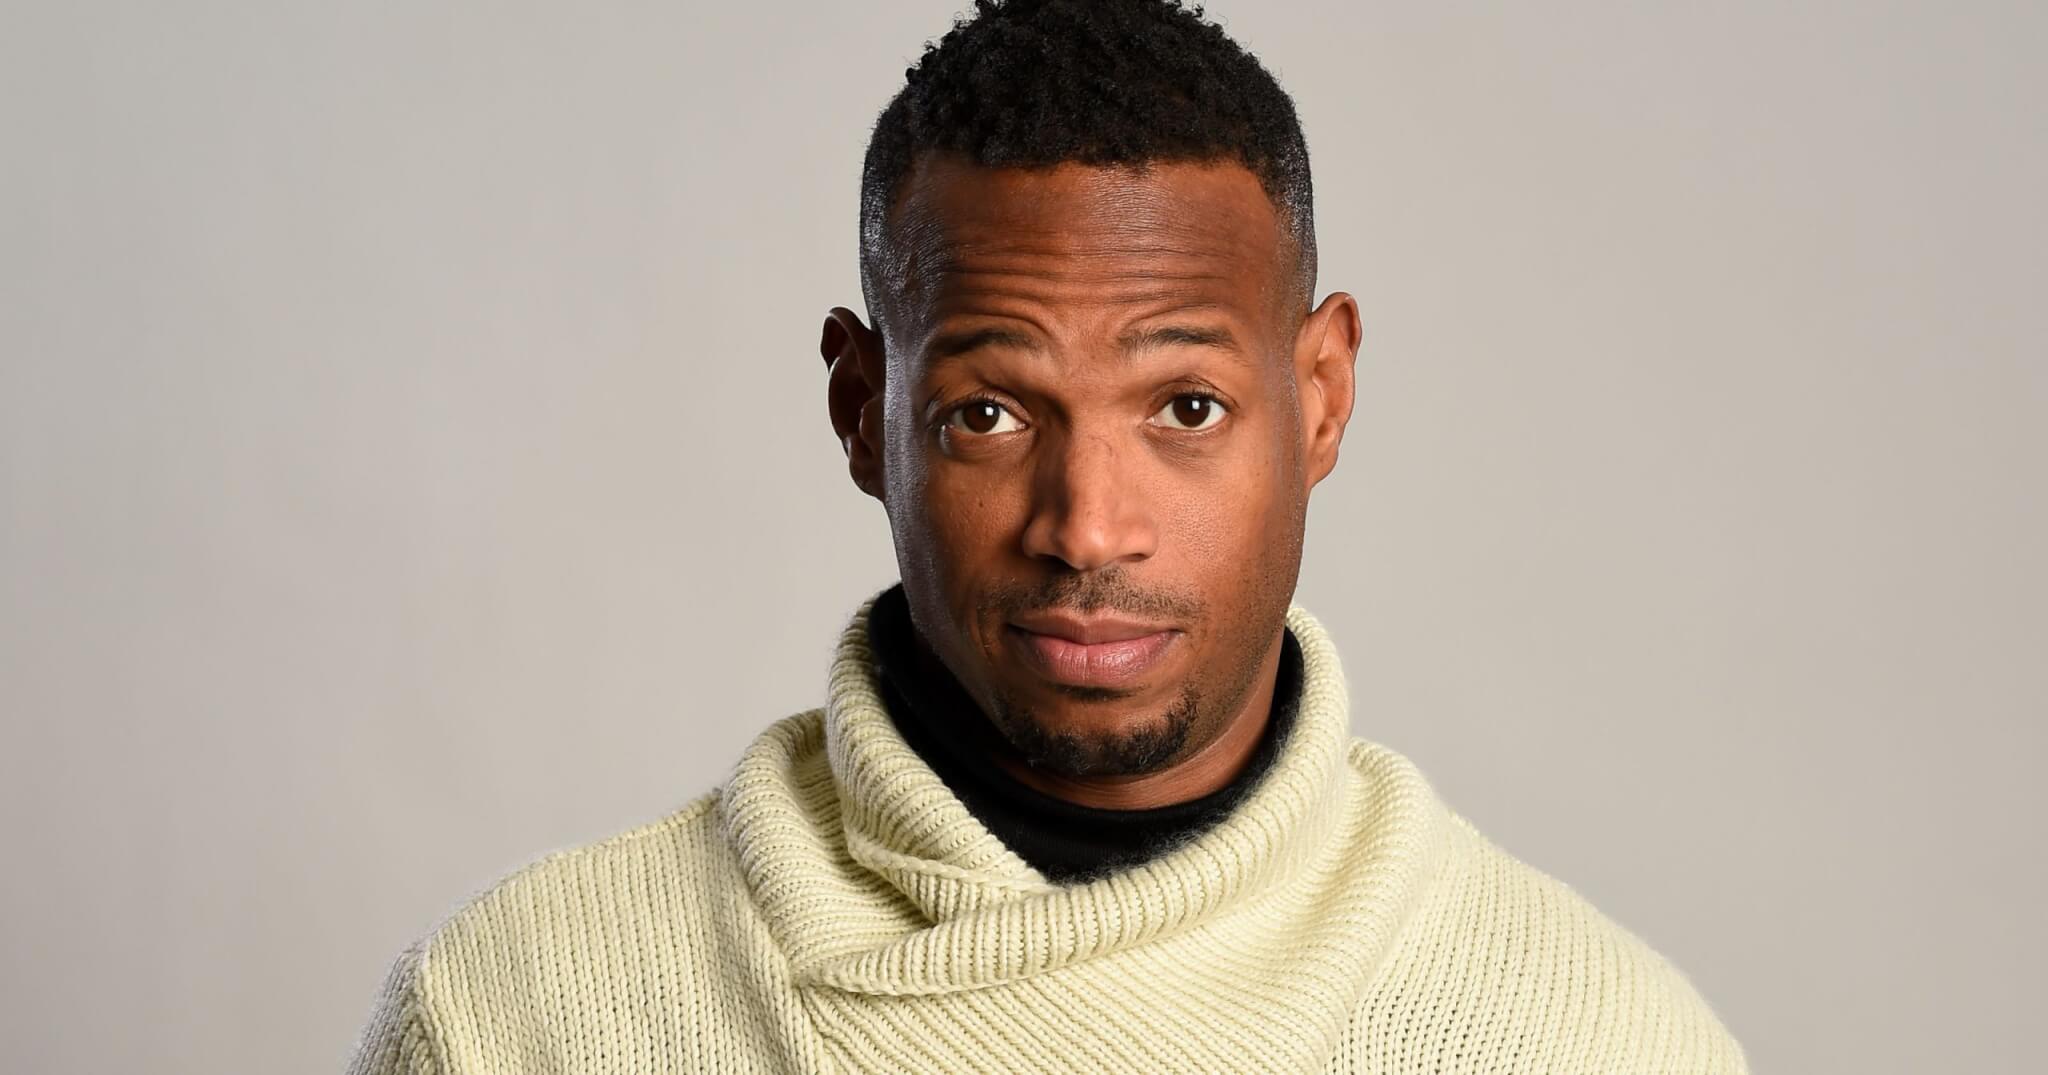 Marlon Wayans Net Worth And Source Of Income